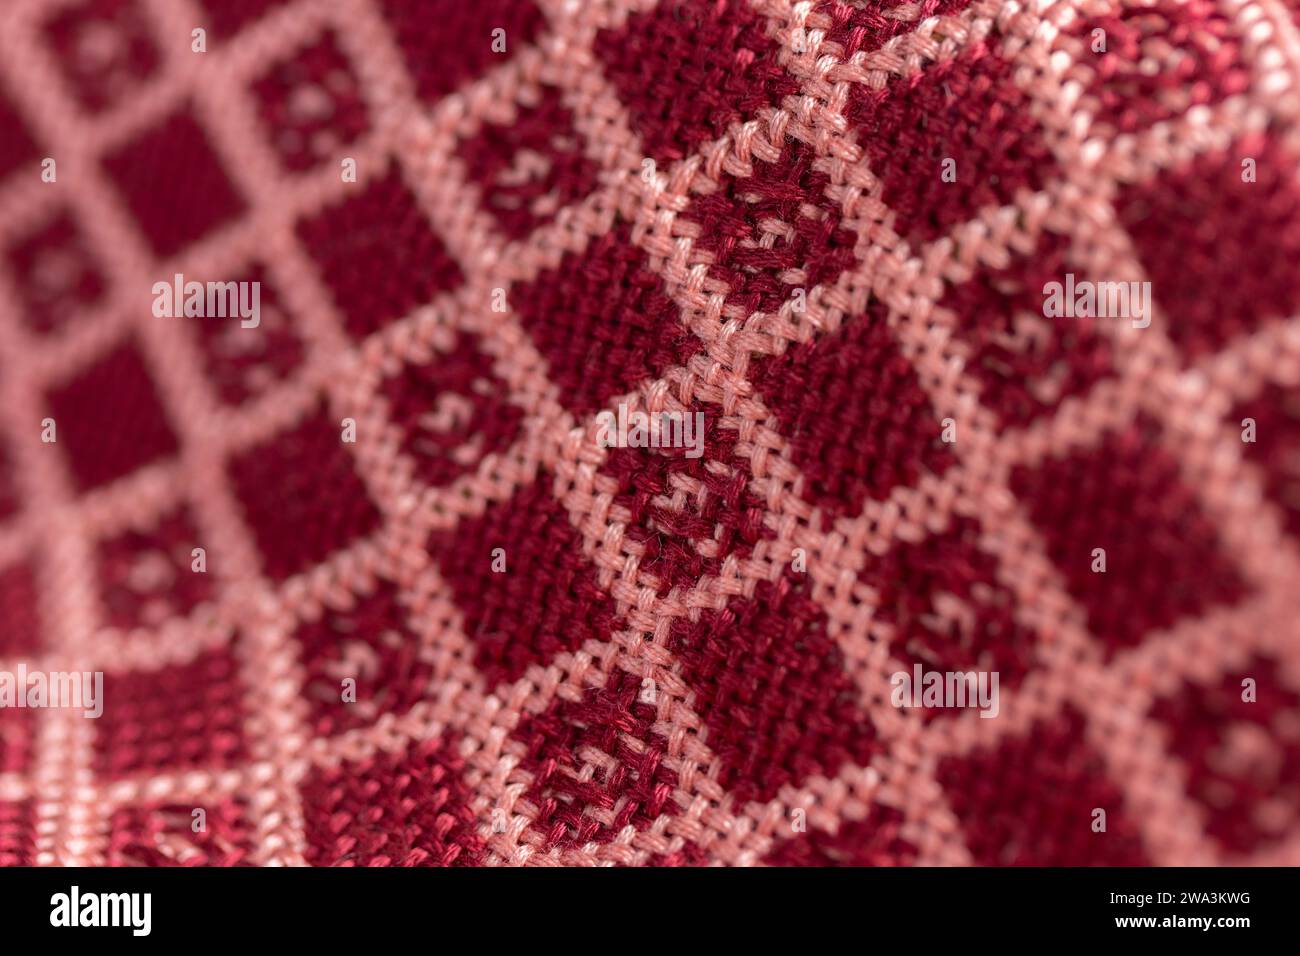 draped woven double cloth in red and pink geometric, diamond grid pattern, close up macro detail shot with shallow depth of field Stock Photo